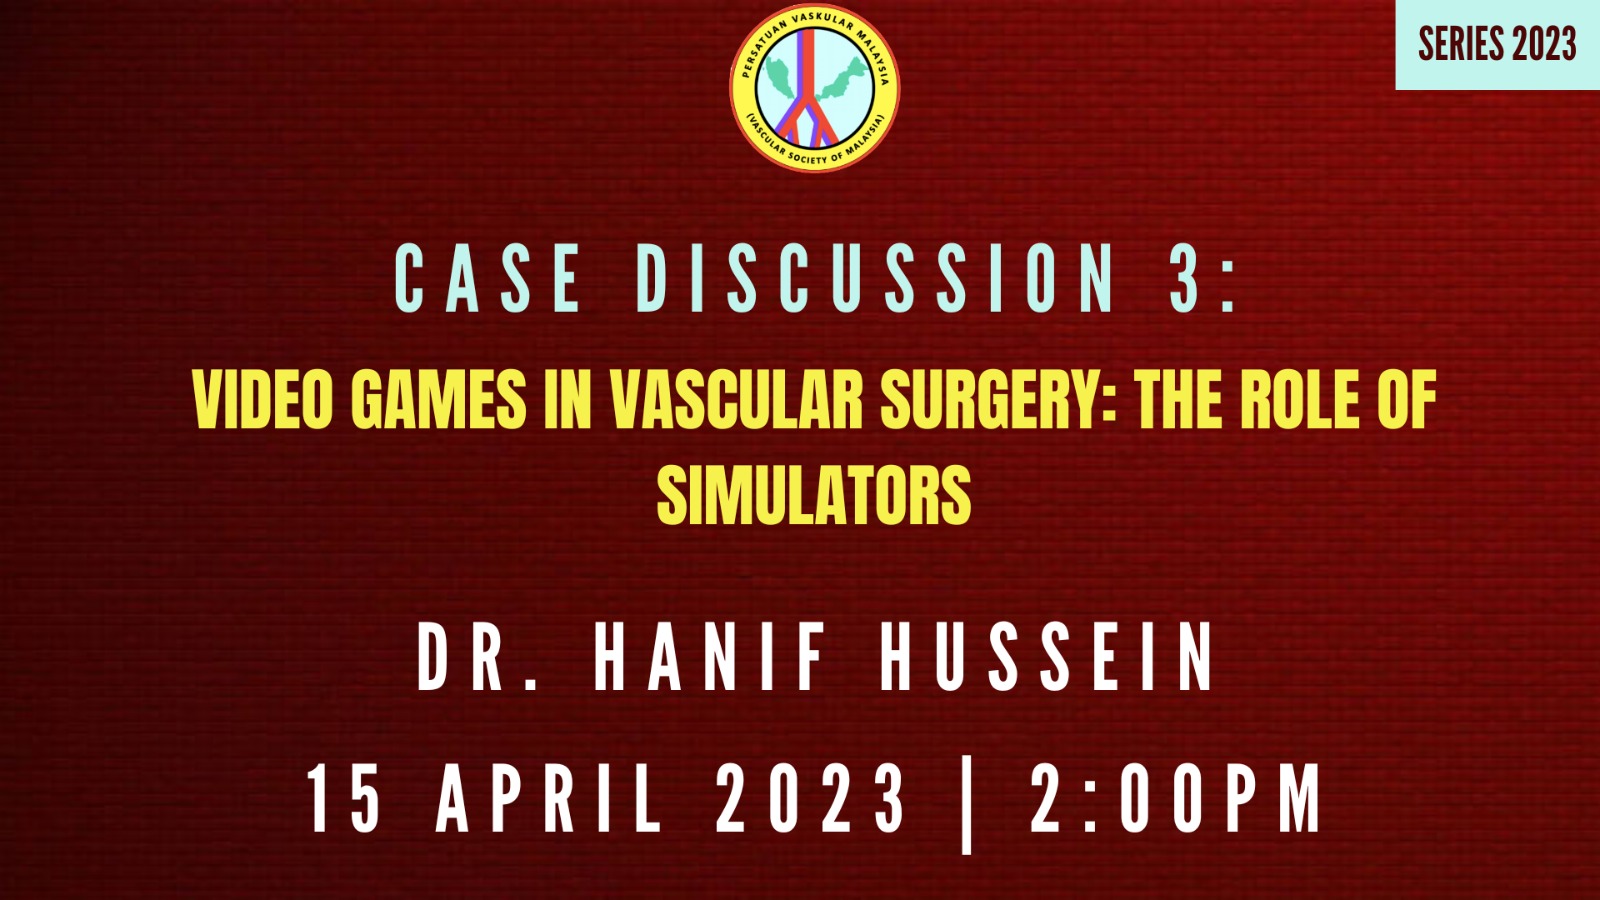 Video Games in Vascular Surgery: The Role of Simulators